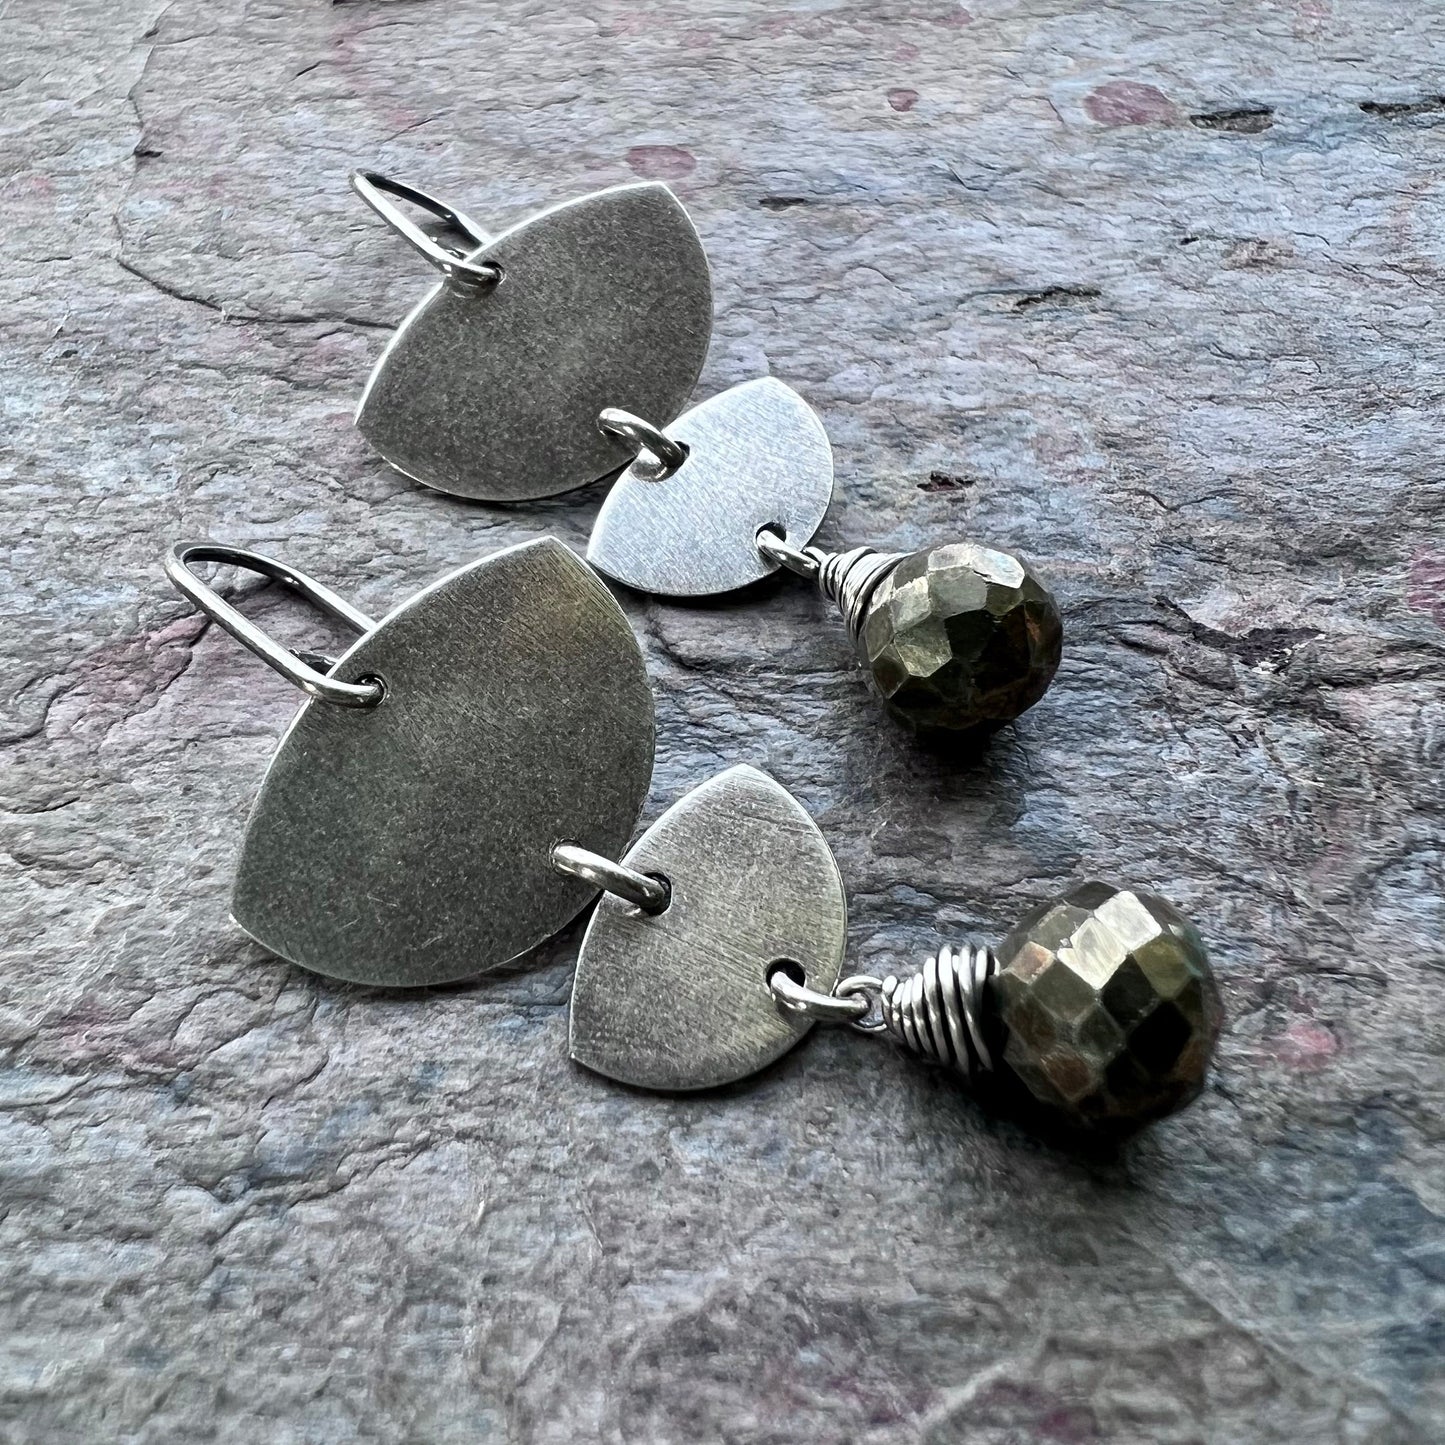 Pyrite Sterling Silver Earrings - Faceted Pyrite Briolettes on Curved Sterling Silver Discs